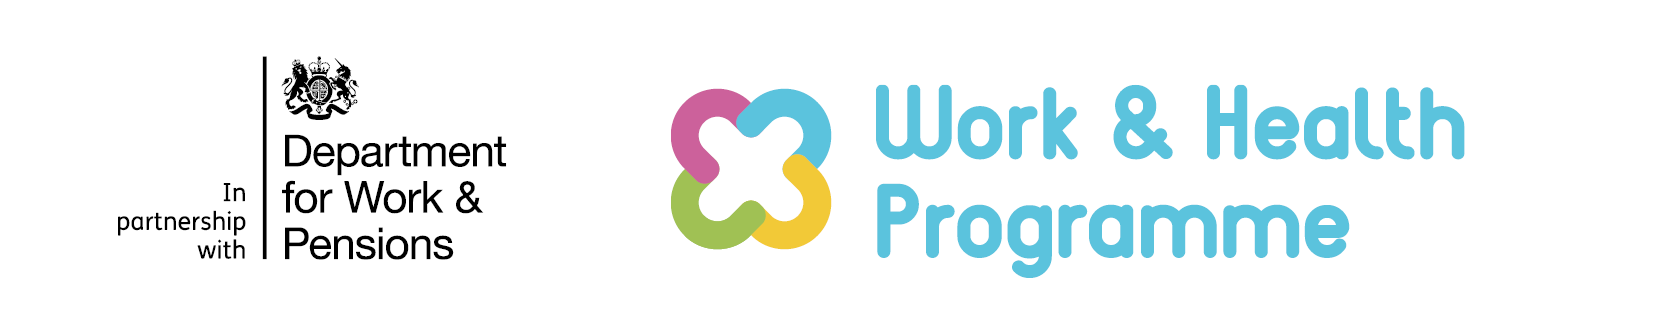 Work and Health Programme logo